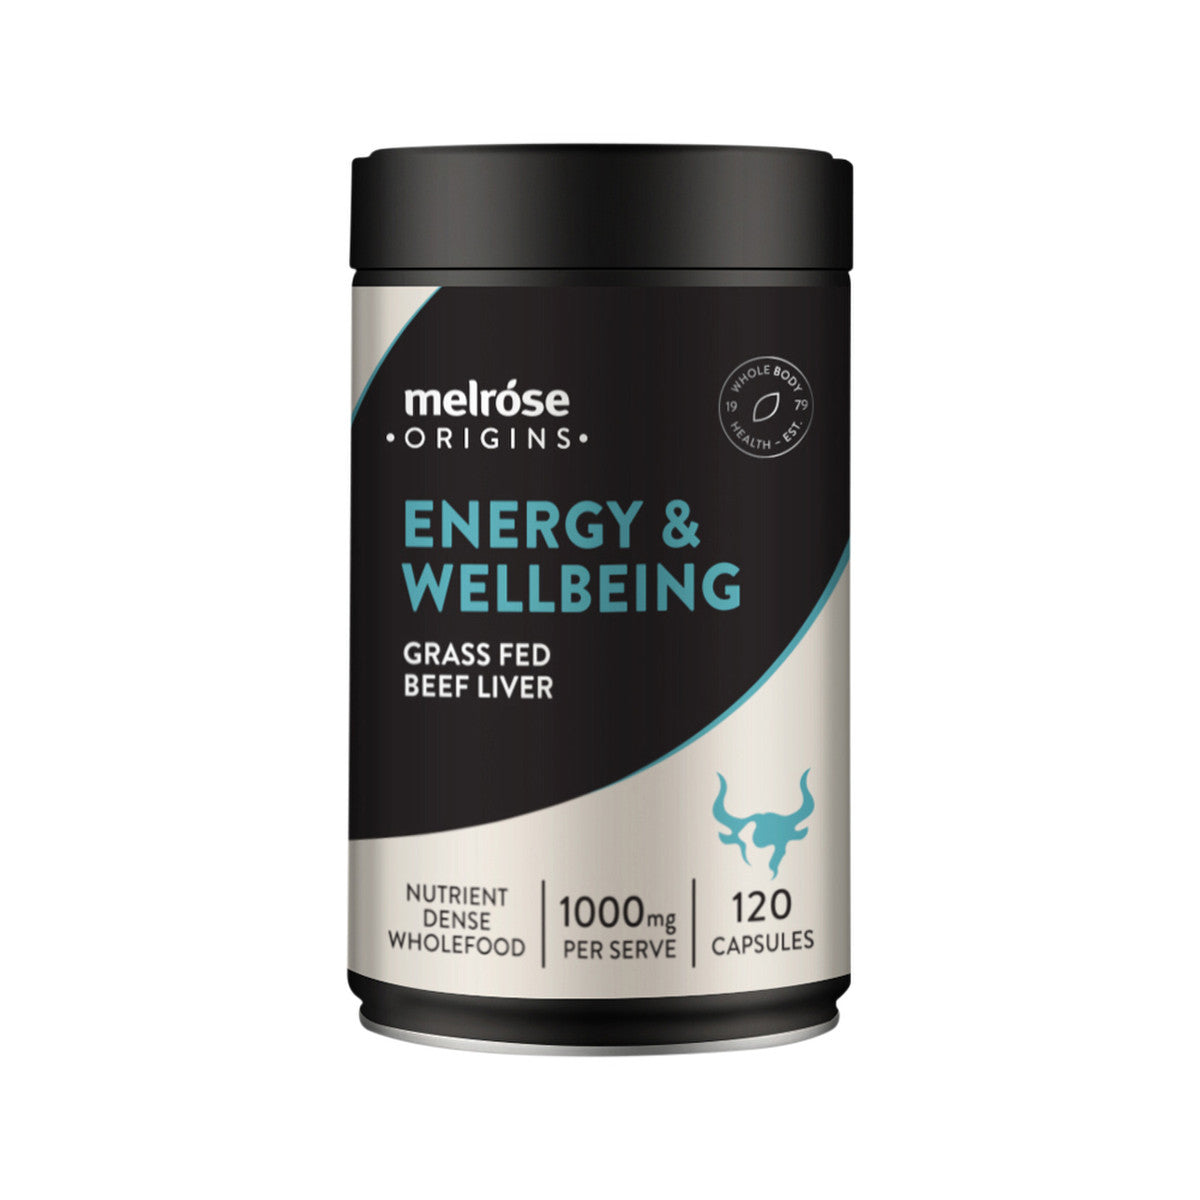 Melrose - Origins Energy & Well Being Grass Fed Beef Liver